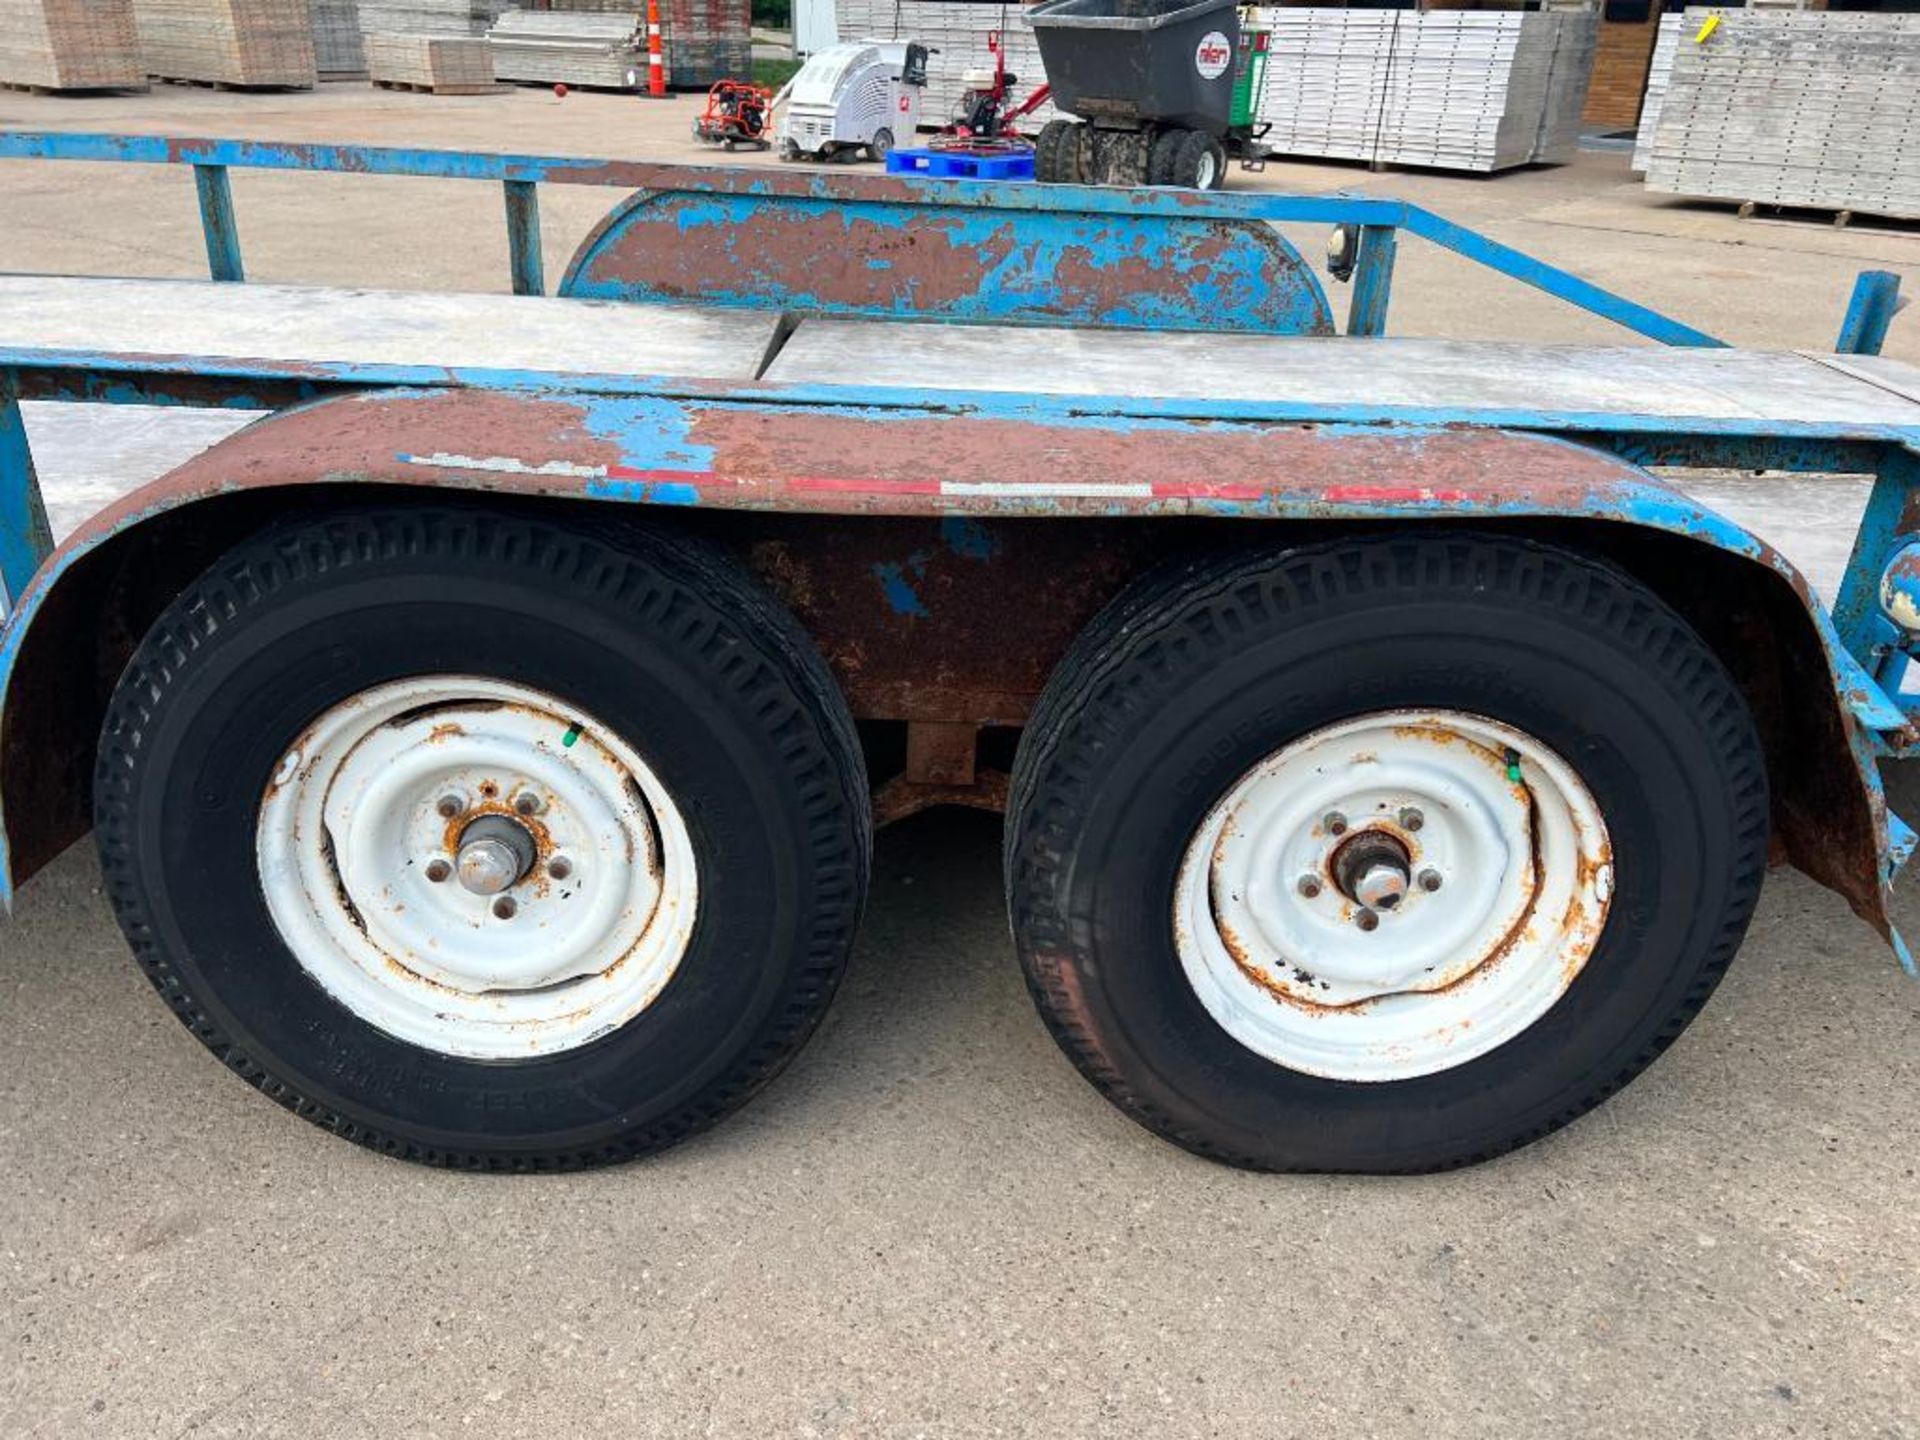 1988 Brewer Utility Trailer, VIN #068814, Flatbed 16' x 76", Dual Axle with Spare Tire & Pintail Rin - Image 3 of 6